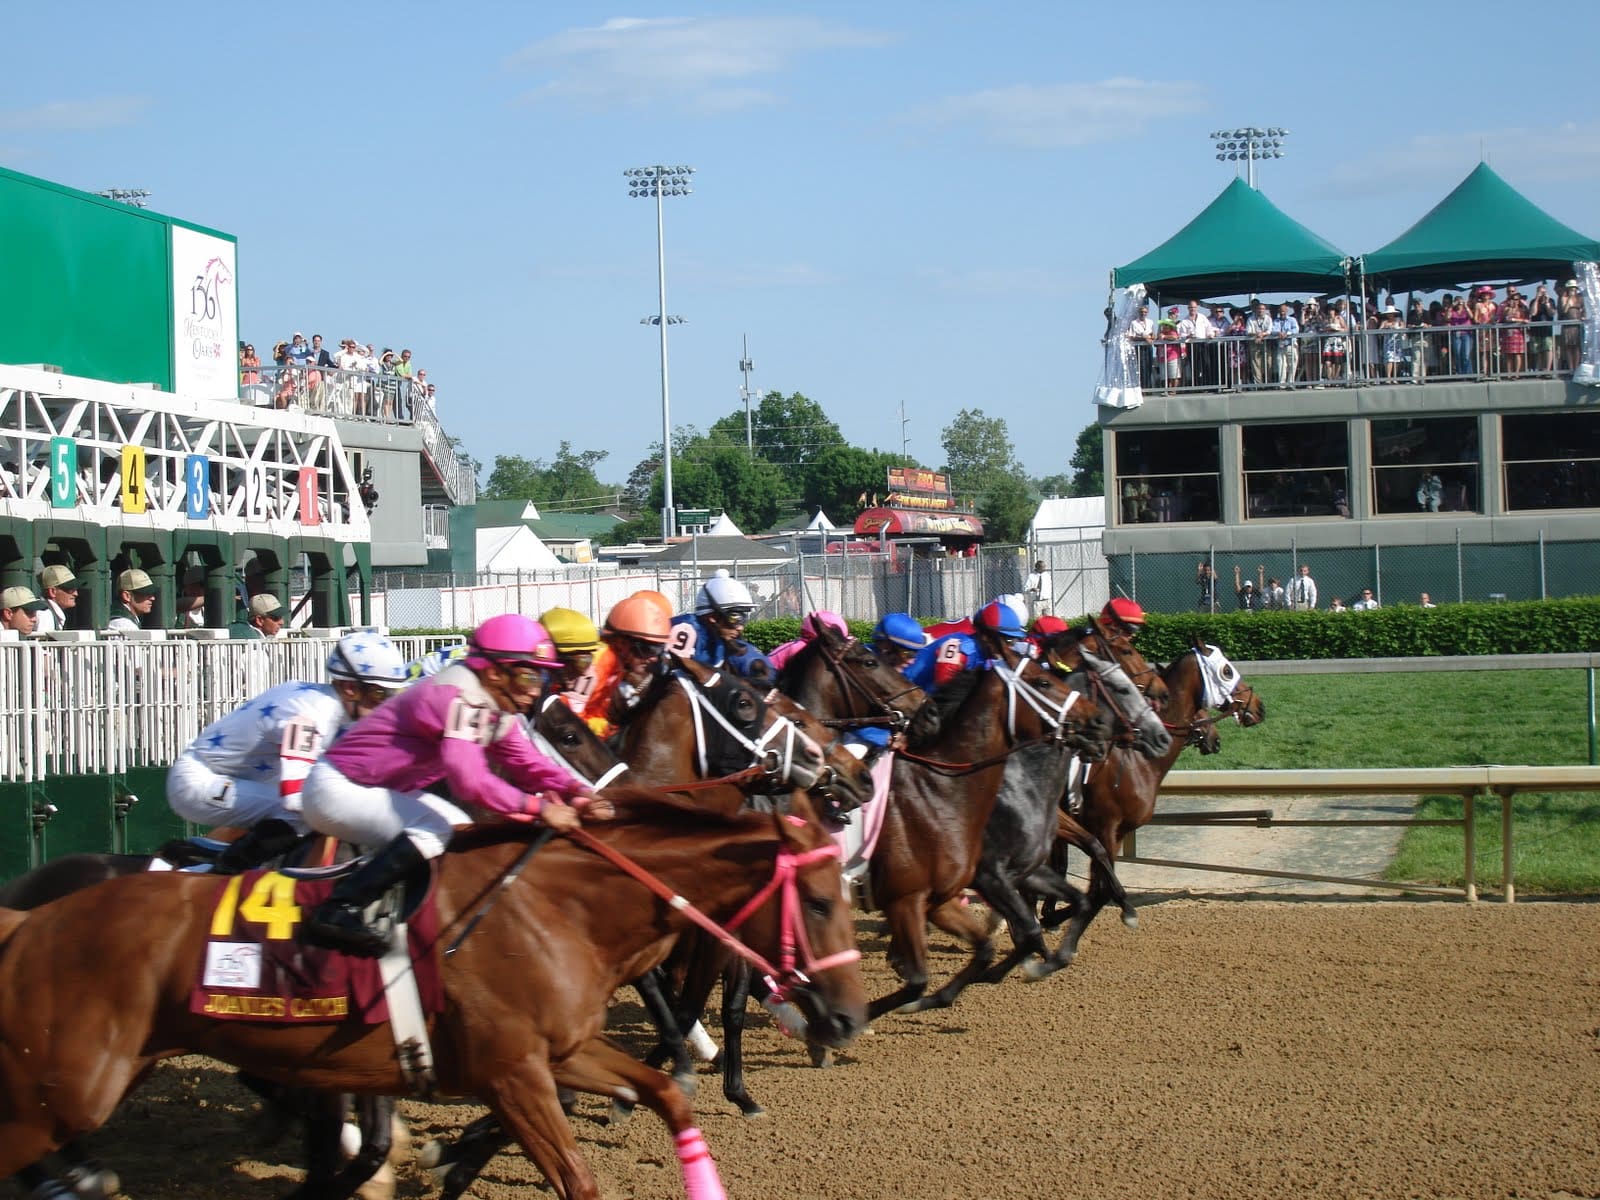 Plans drawn up for Kentucky Derby contenders